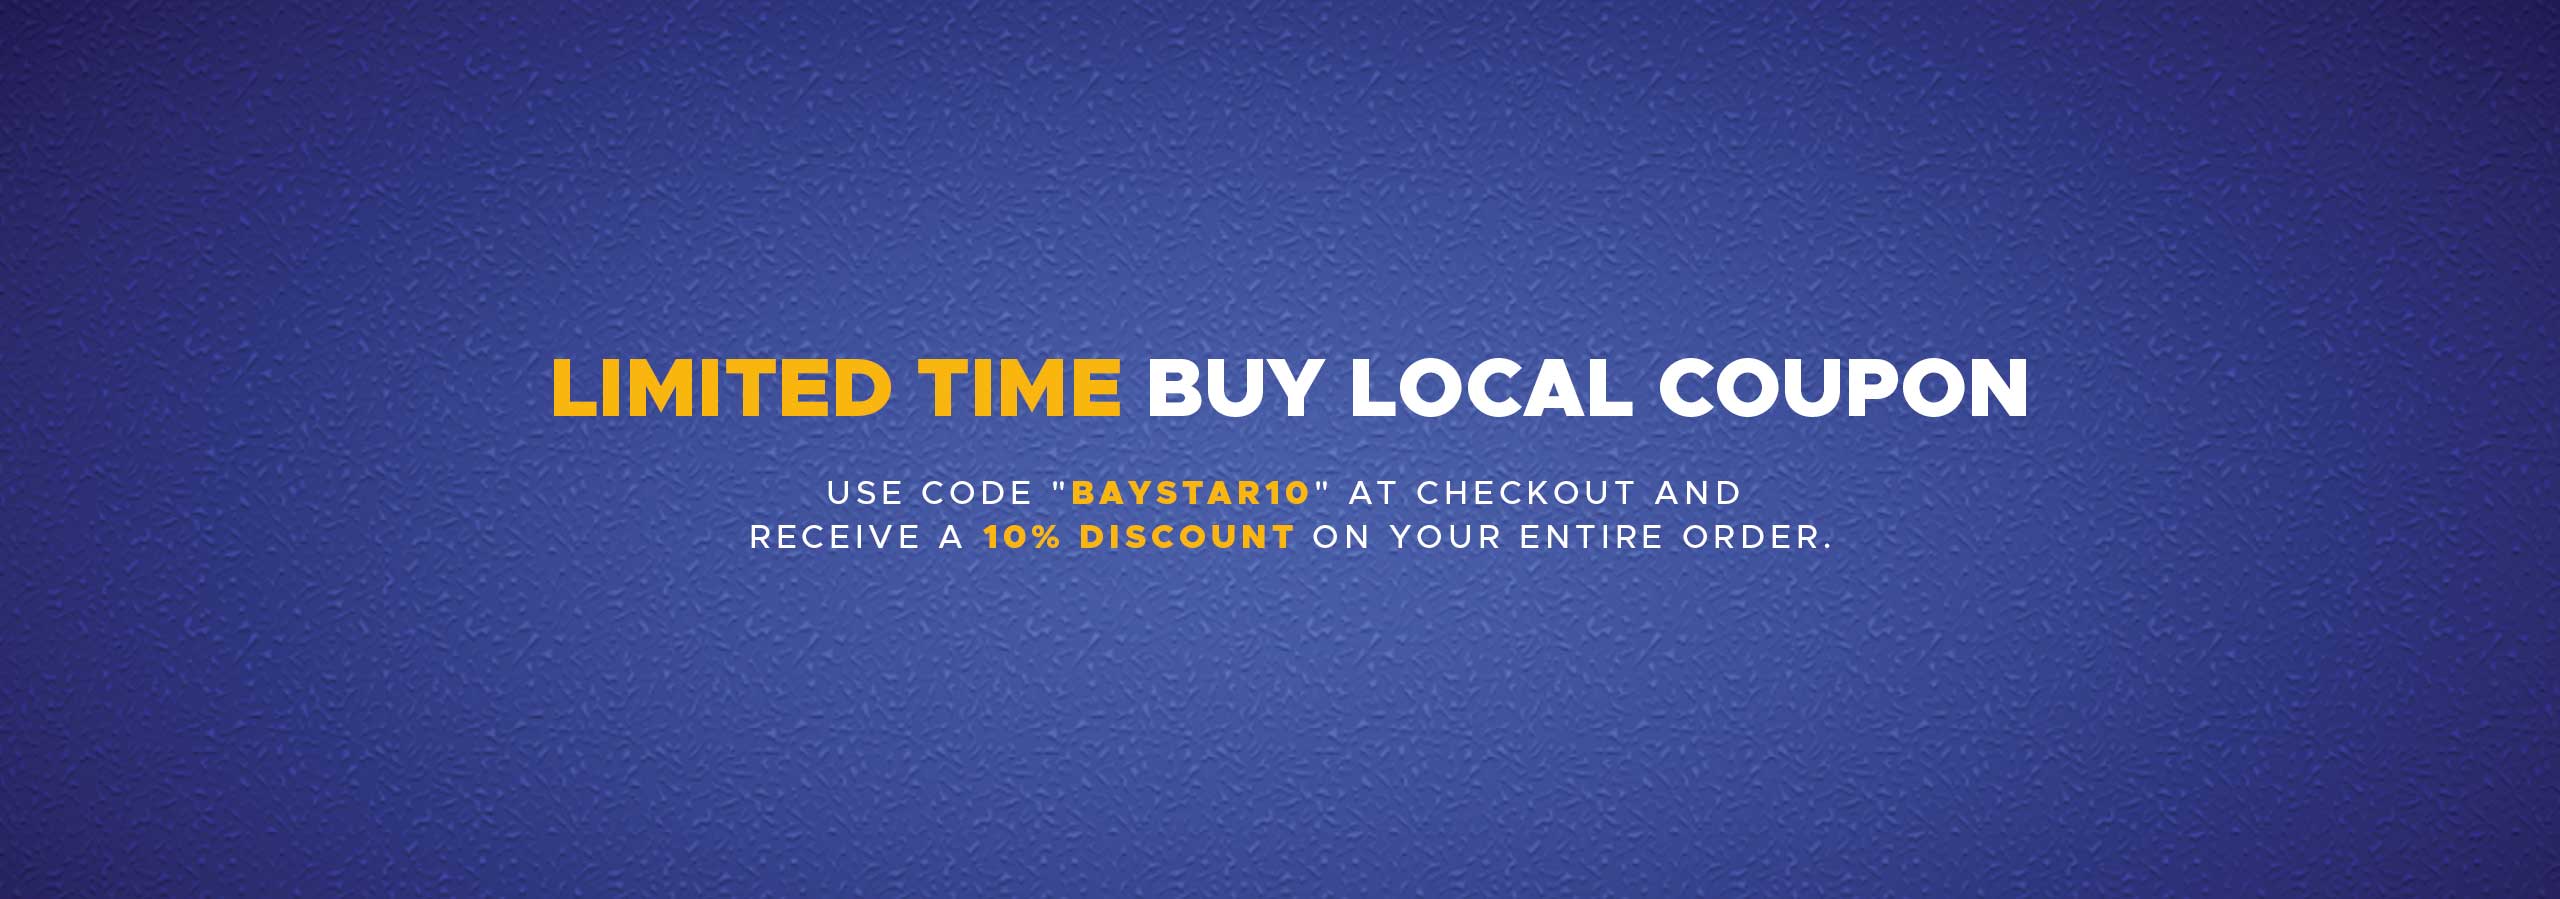 Limited Time - Buy Local Coupon